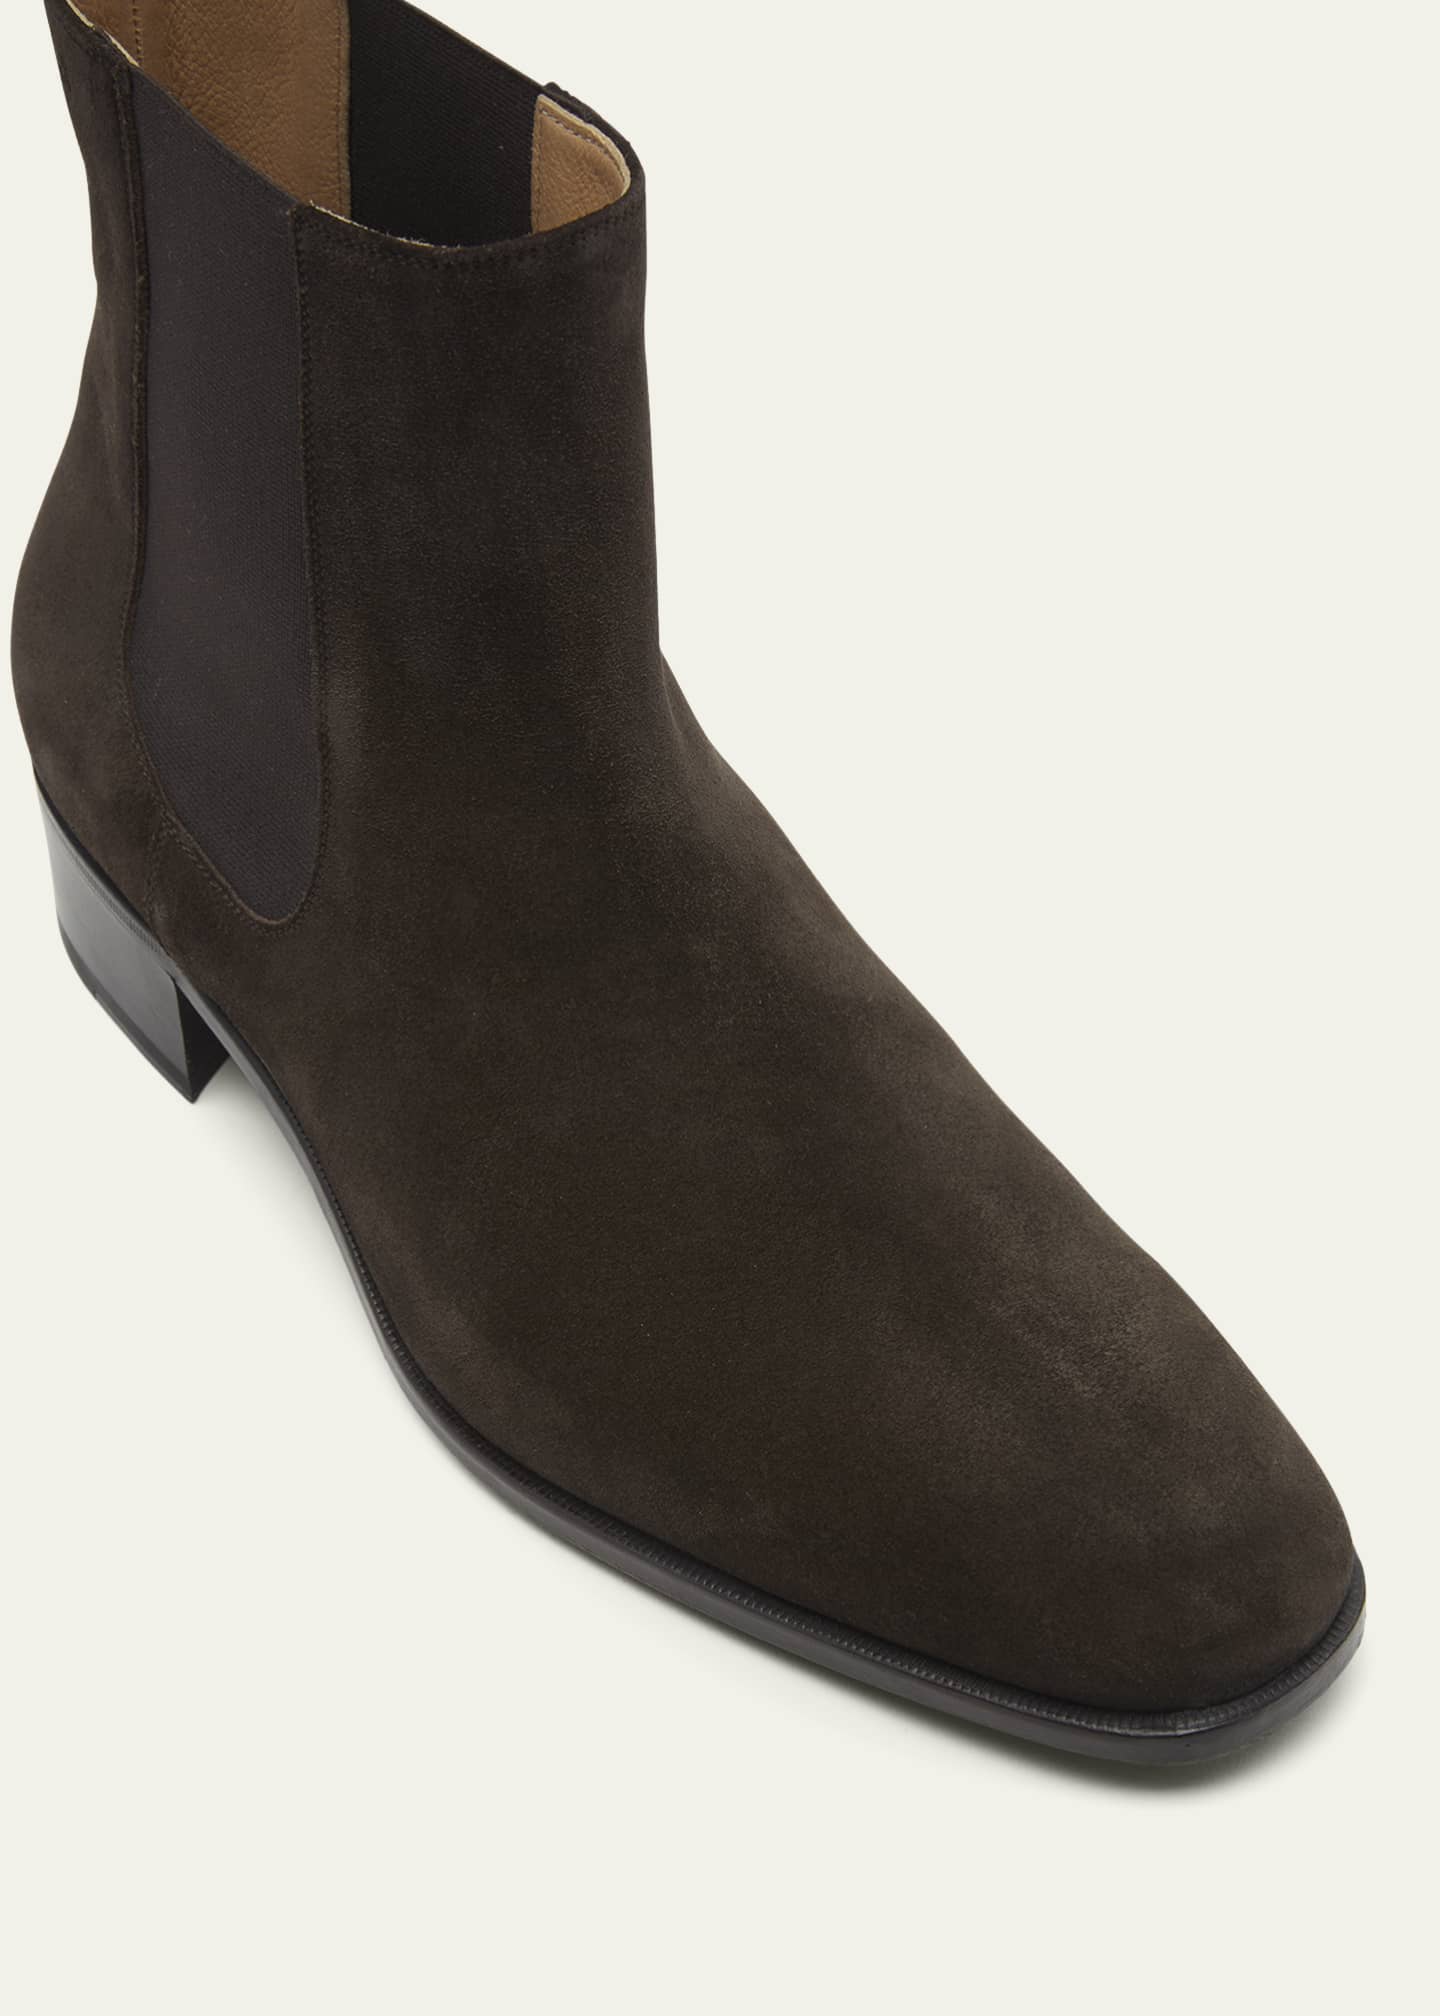 FORD Men's Alec Suede Ankle Chelsea Boots - Bergdorf Goodman